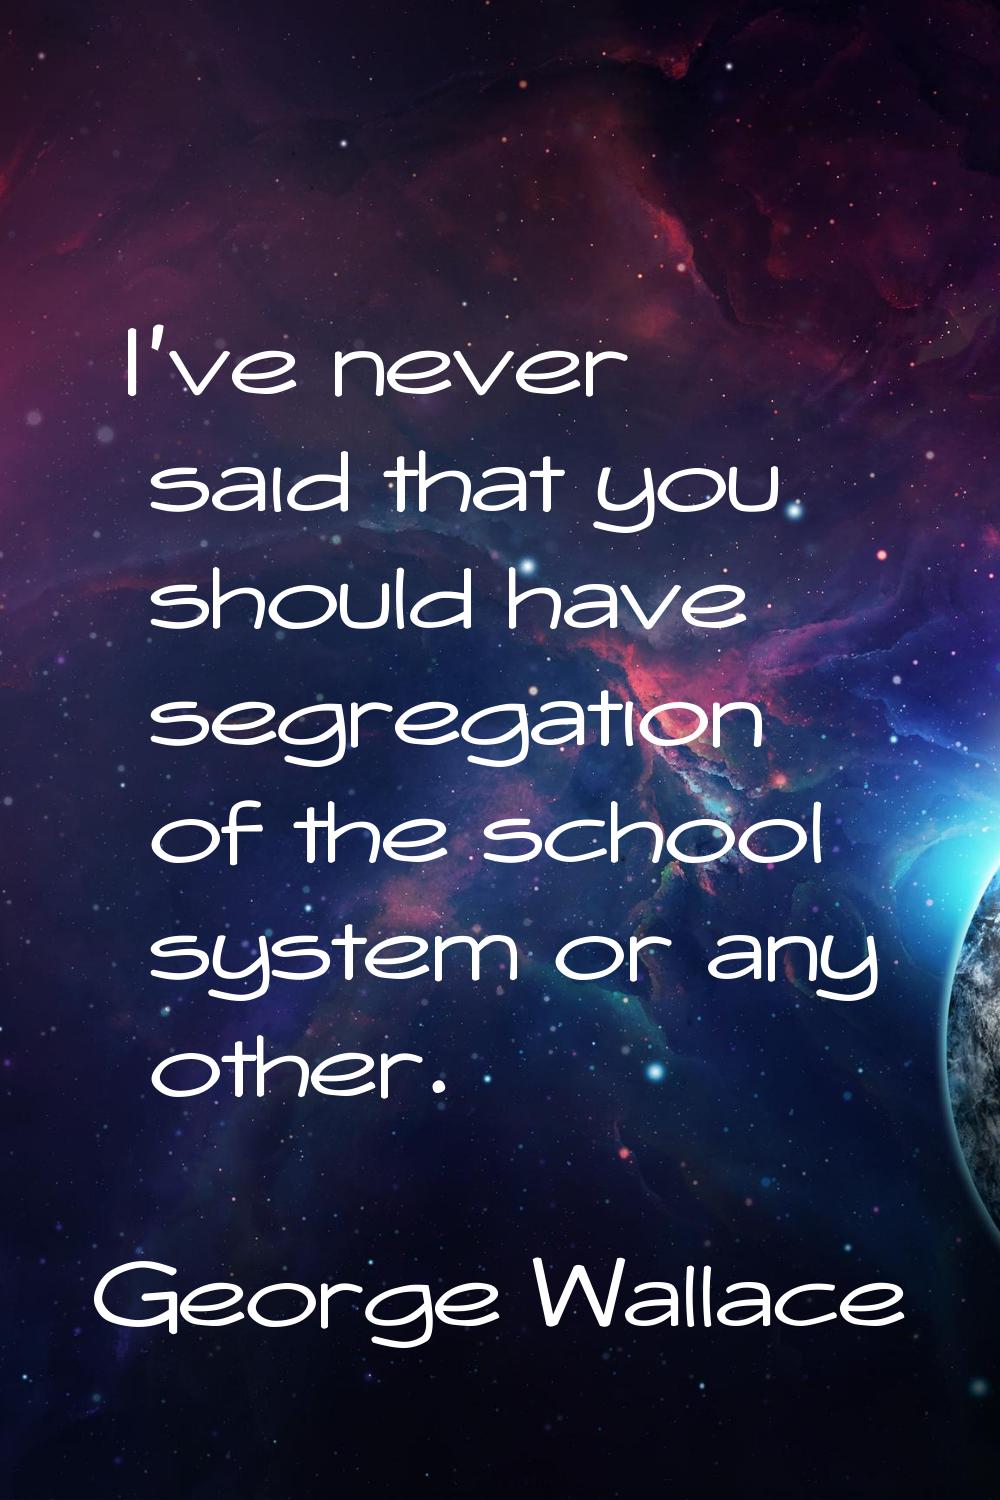 I've never said that you should have segregation of the school system or any other.